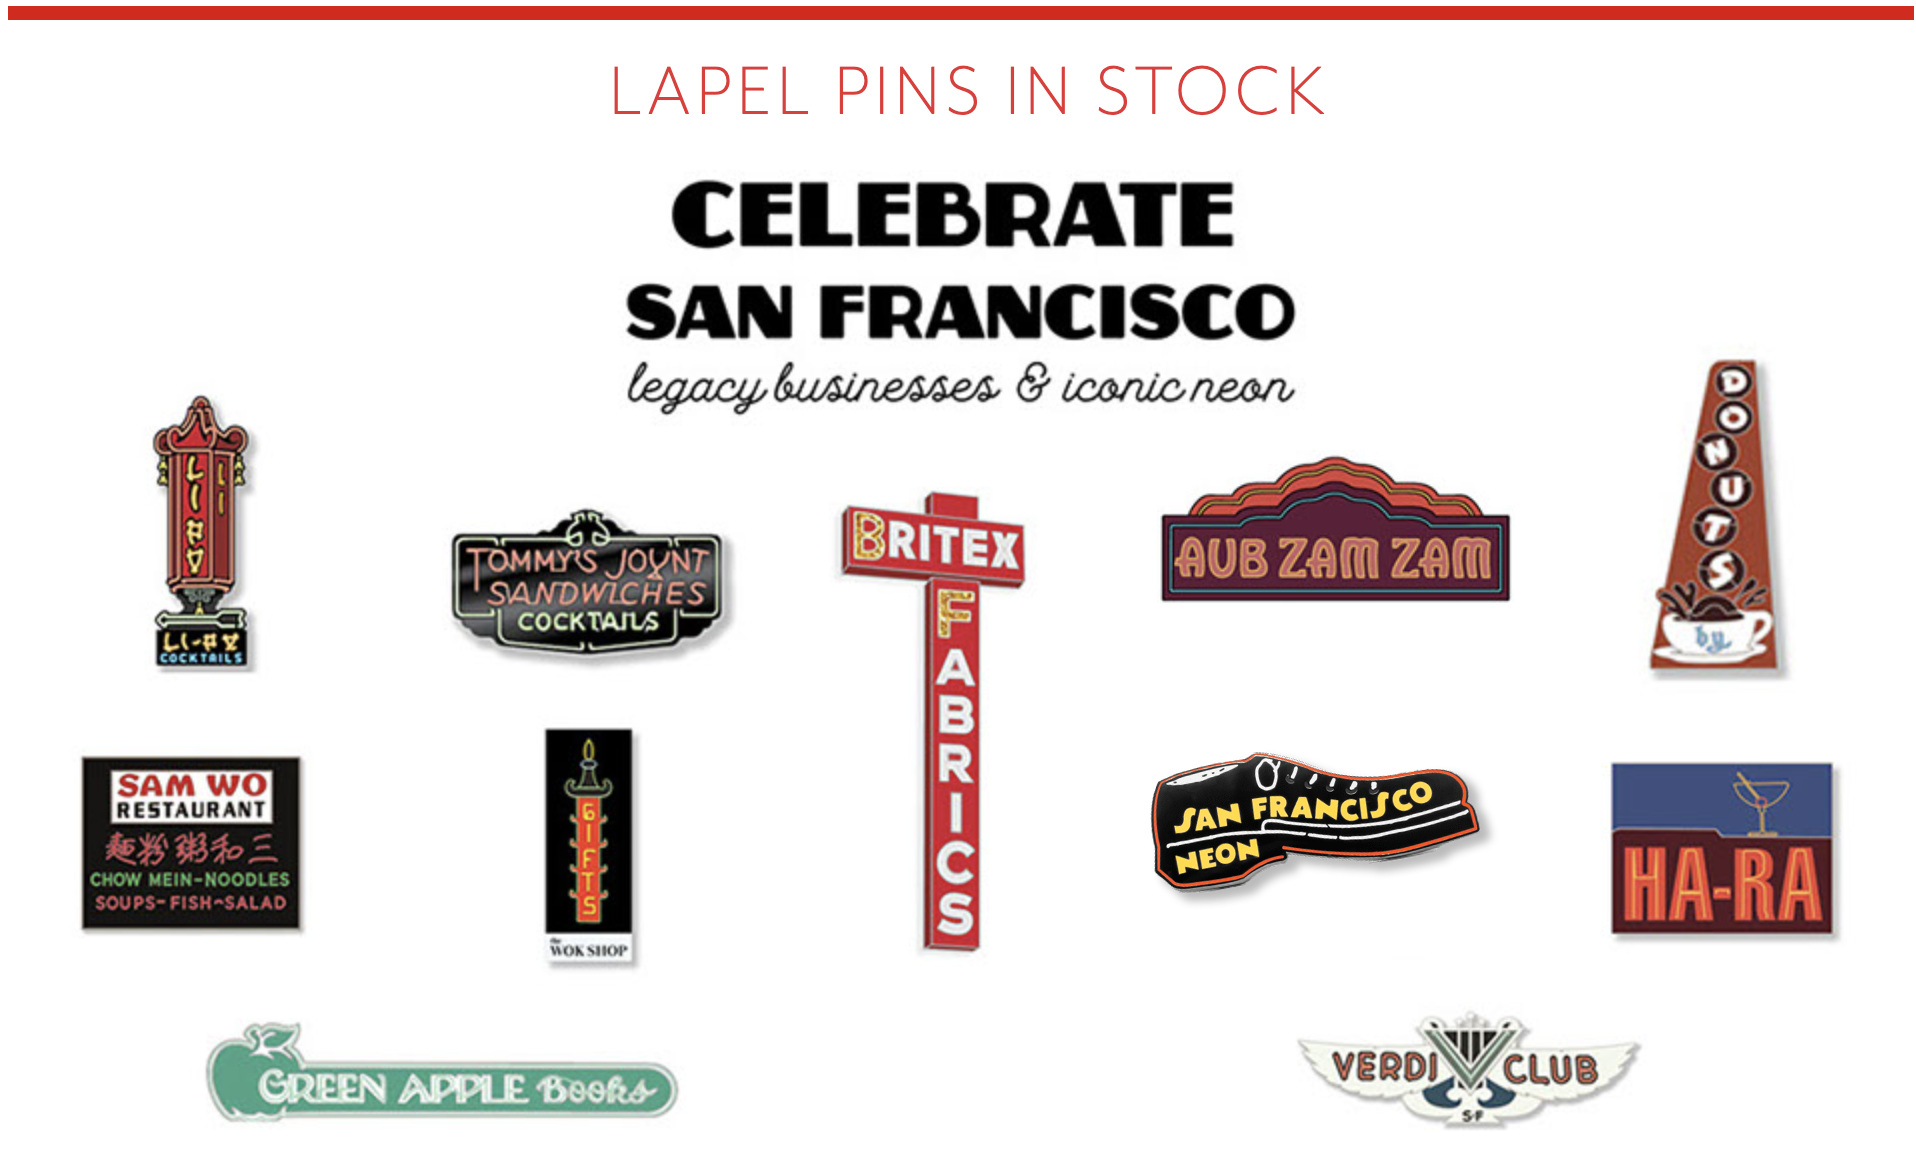 Small lapel pins in the shapes of famous neon signs.